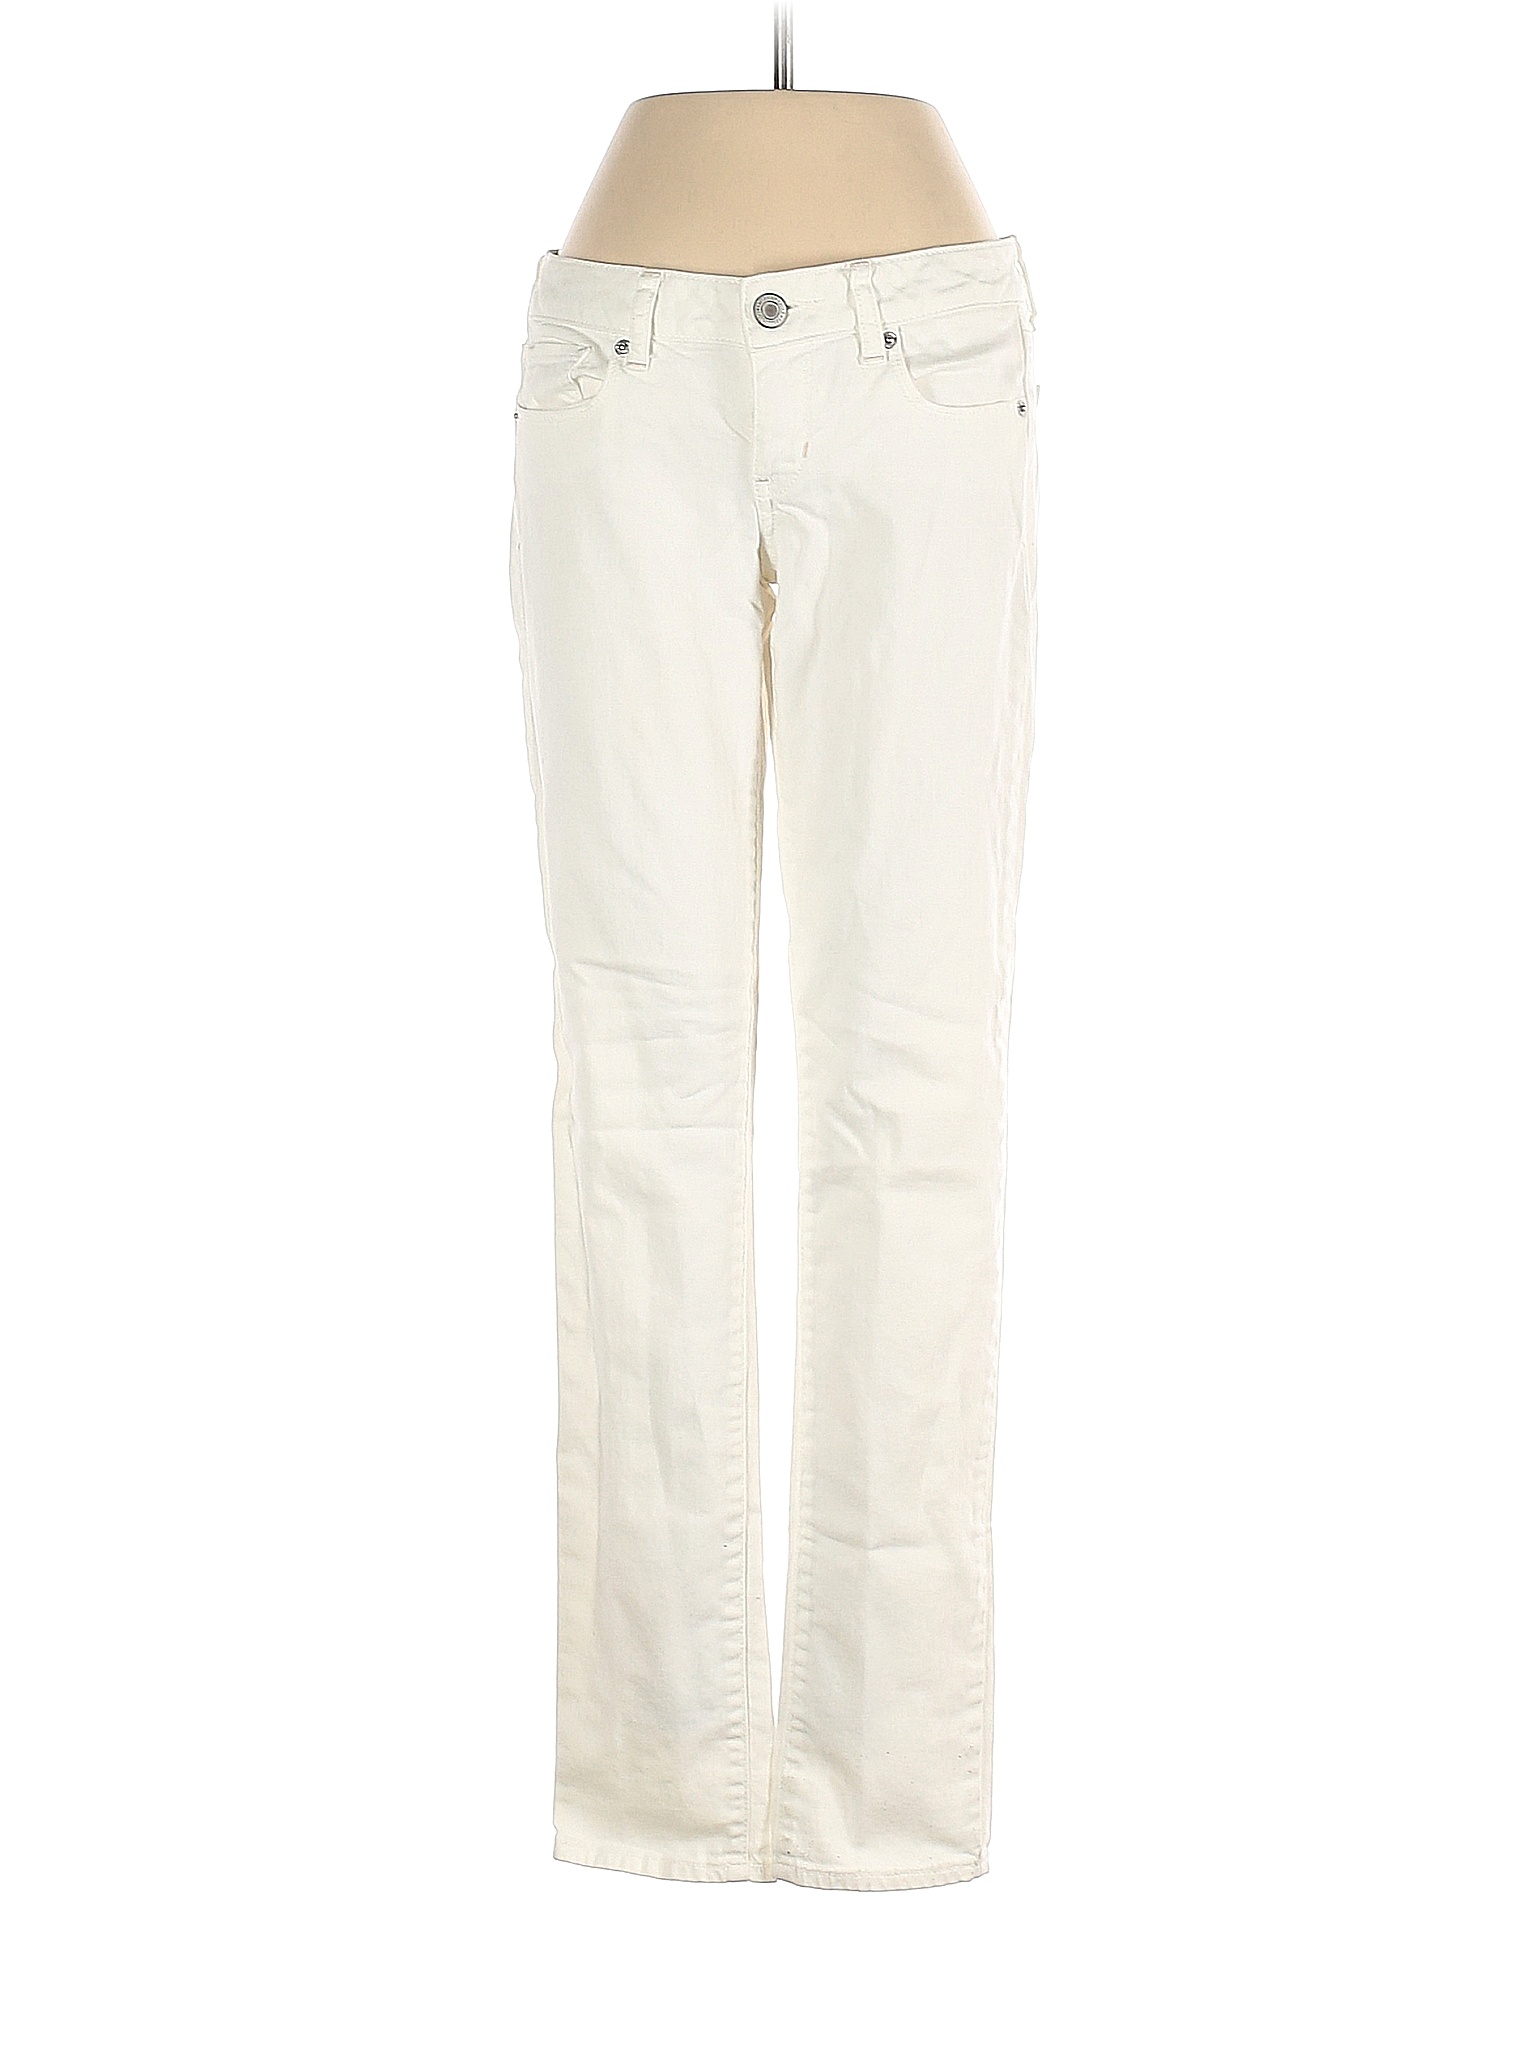 American Eagle Outfitters Solid Ivory Jeans Size 0 - 69% off | thredUP